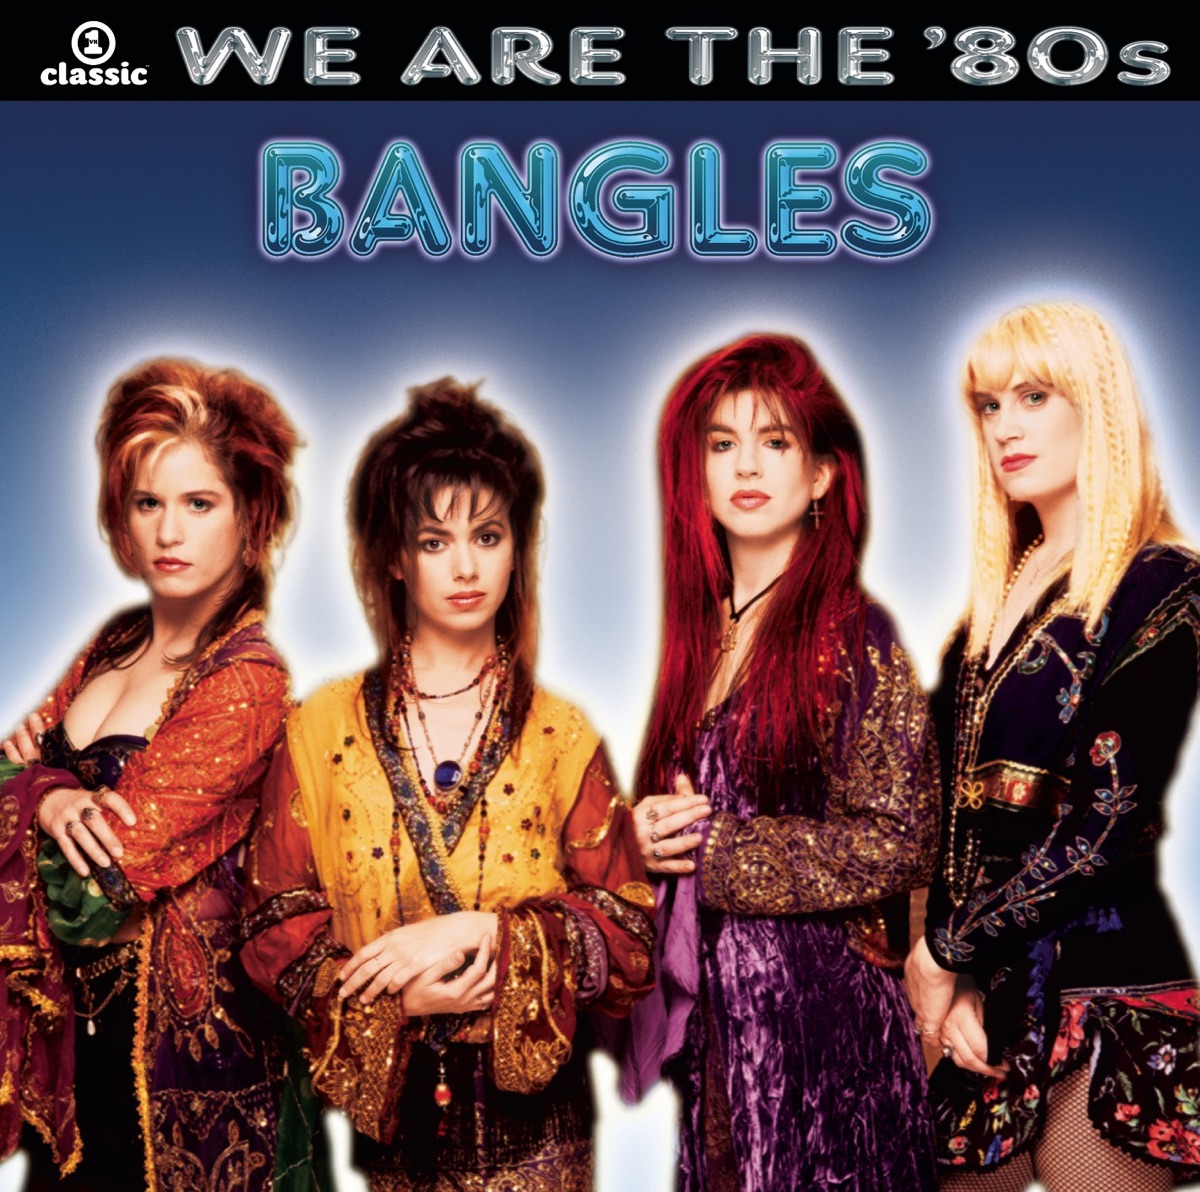 Walk Like An Egyptian The Best Of The Bangles By The Bangles On Apple Music